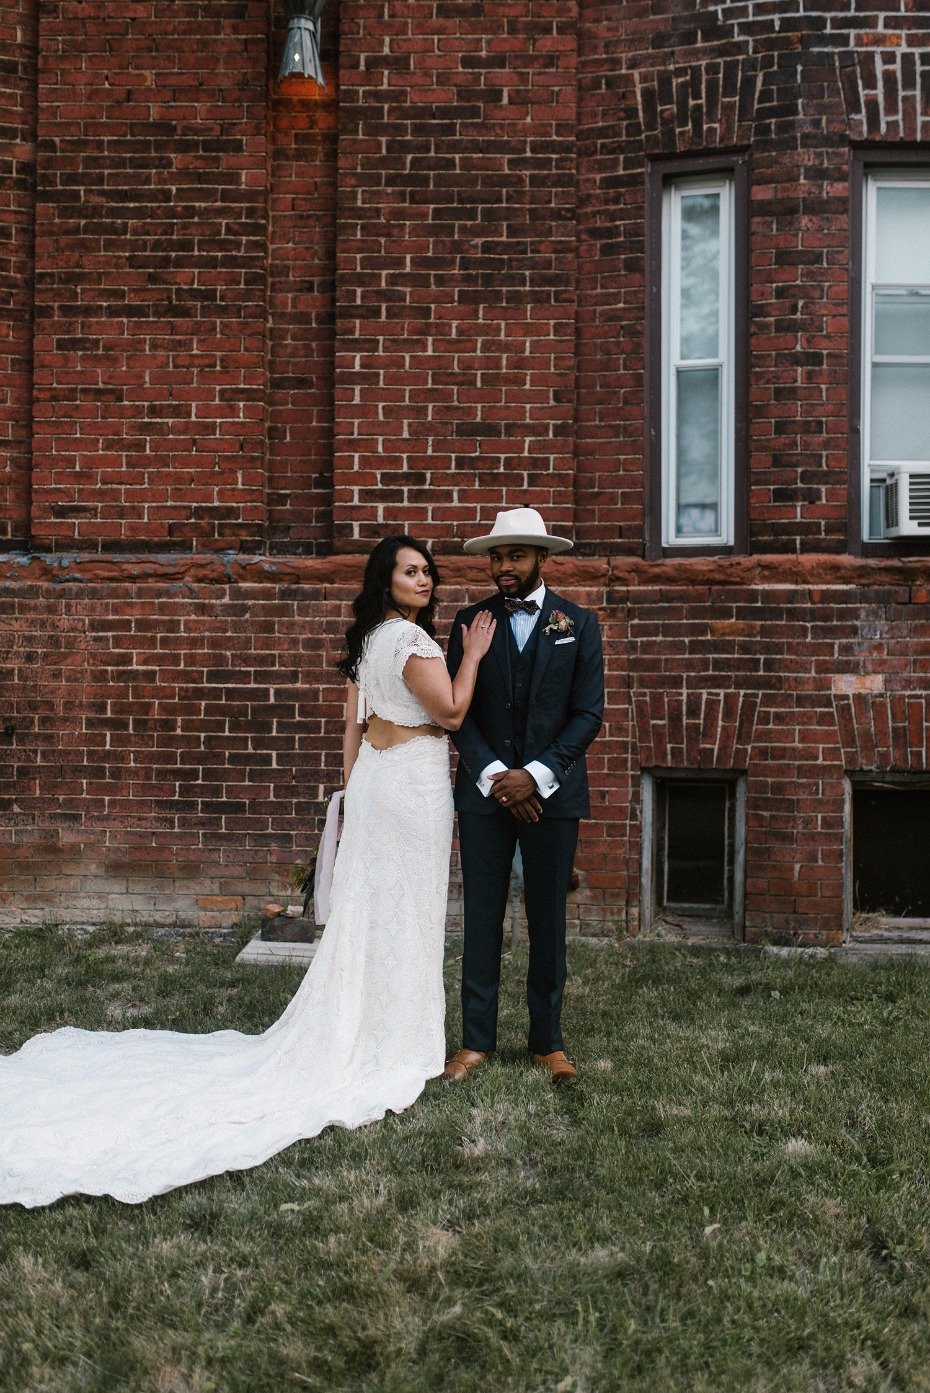 Fall at-home elopement ideas from Detroit